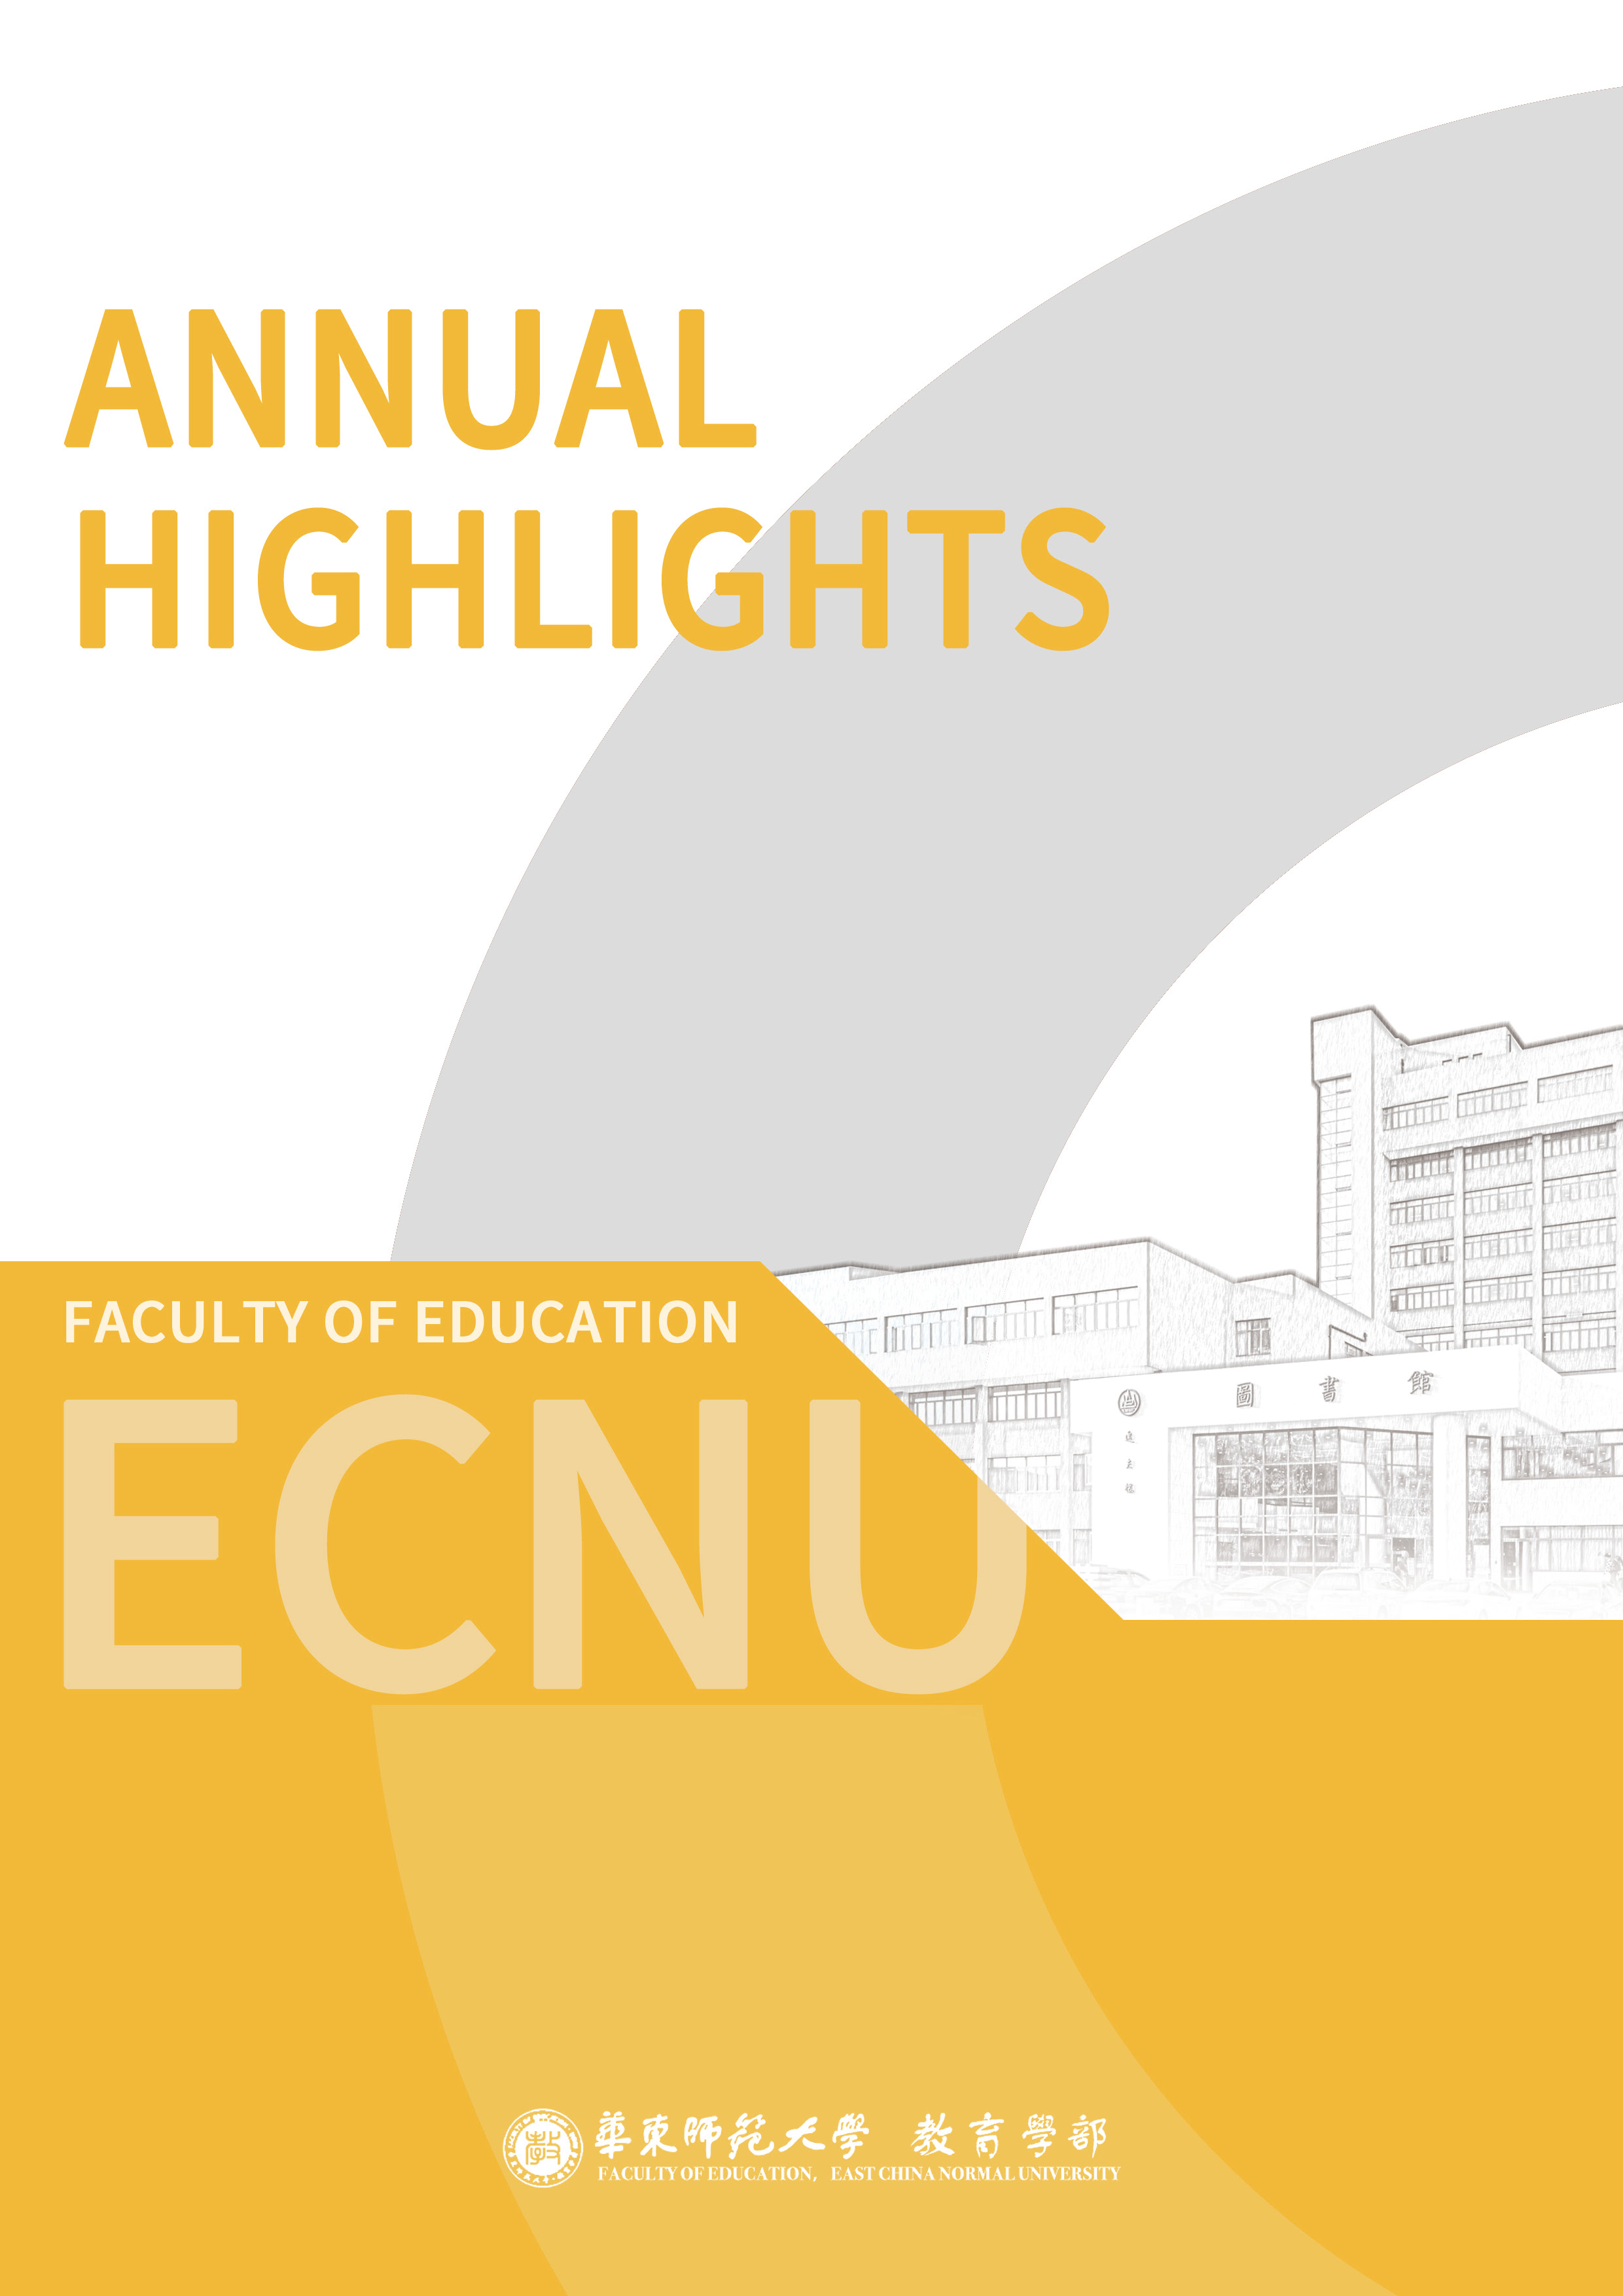 Annual Highlights of ECNU Faculty of Education